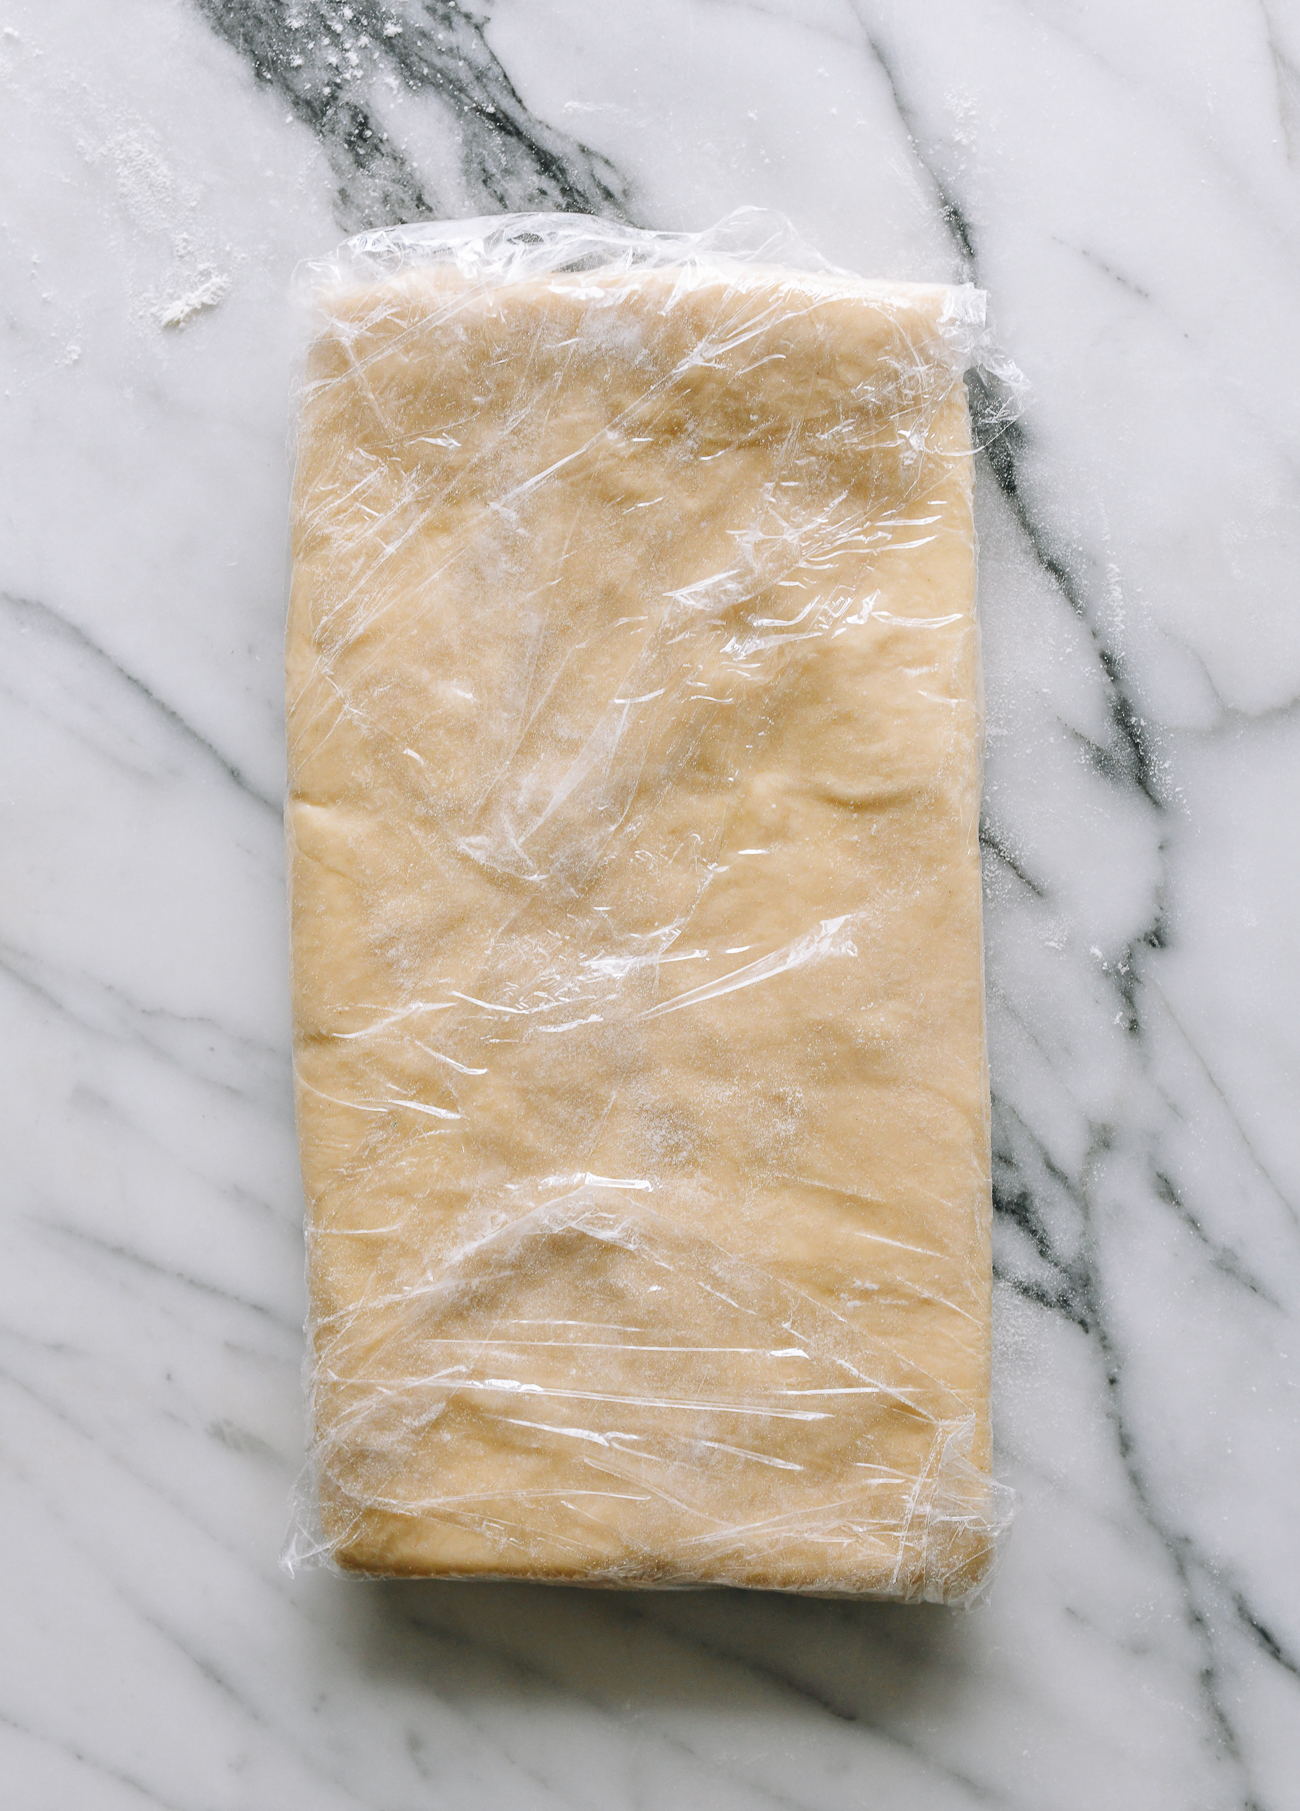 Croissant dough wrapped in plastic wrap